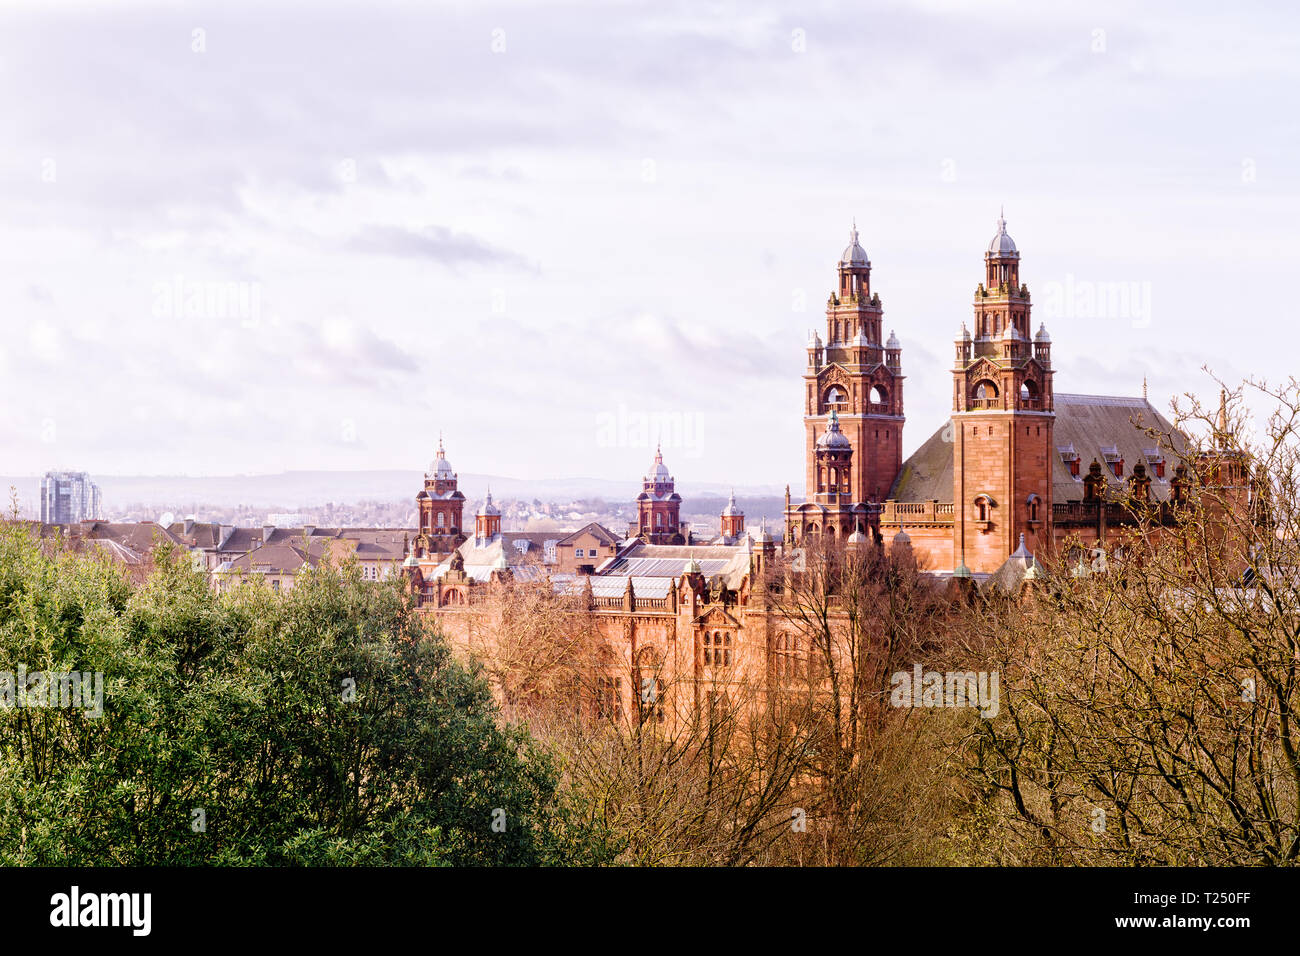 Glasgow, UK - March 23, 2019: the Kelvingrove Art Gallery and museum from University hill in the morning light Stock Photo